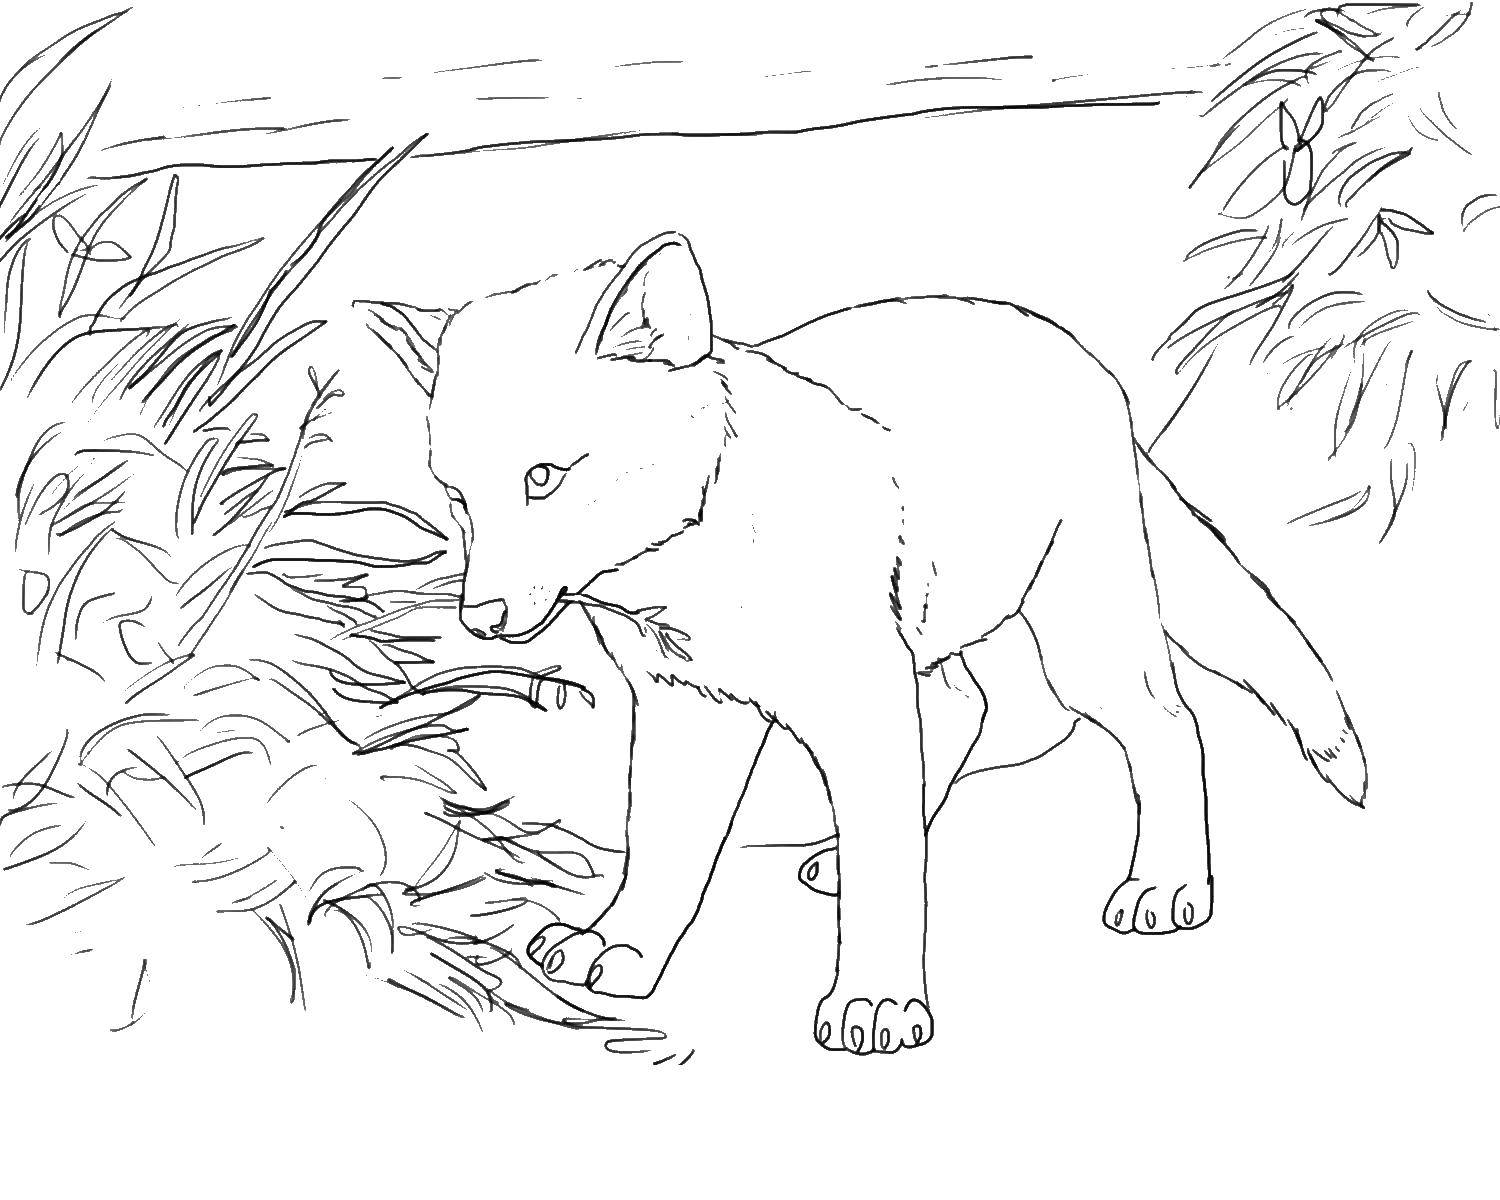 Coloring Fox chews grass. Category Fox. Tags:  Fox, foxes.